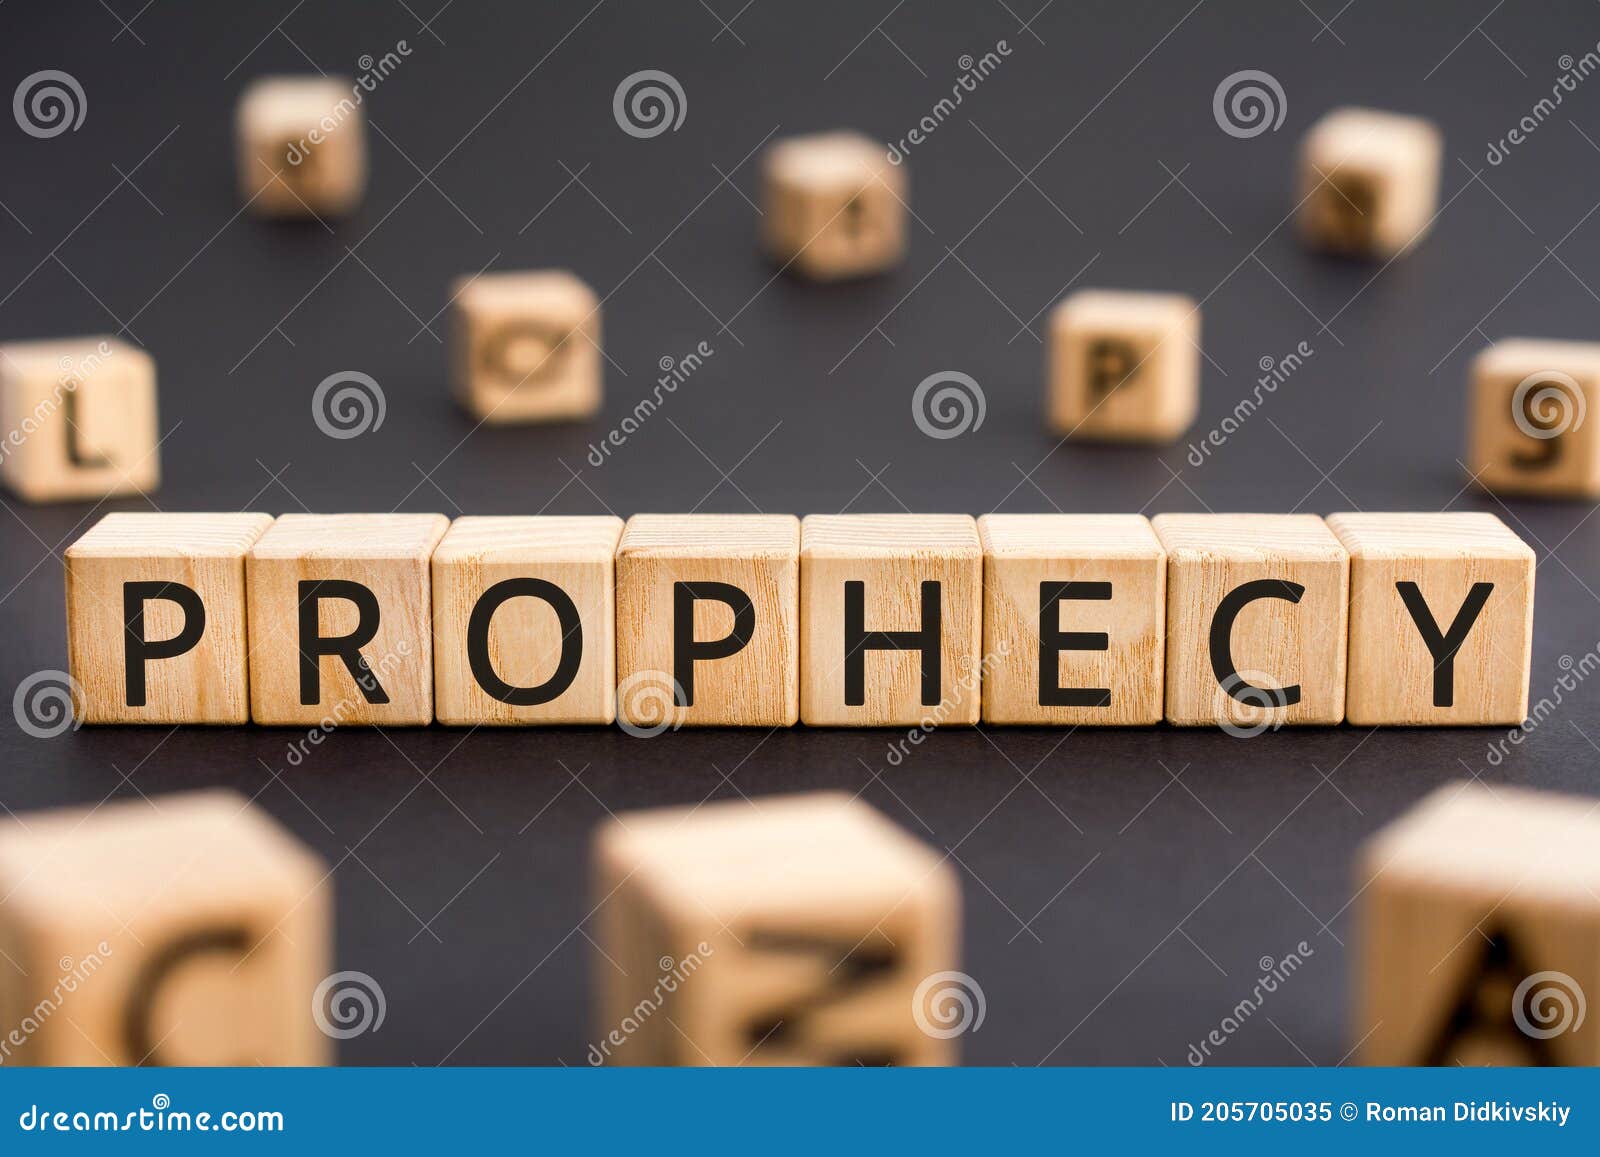 prophecy - word from wooden blocks with letters